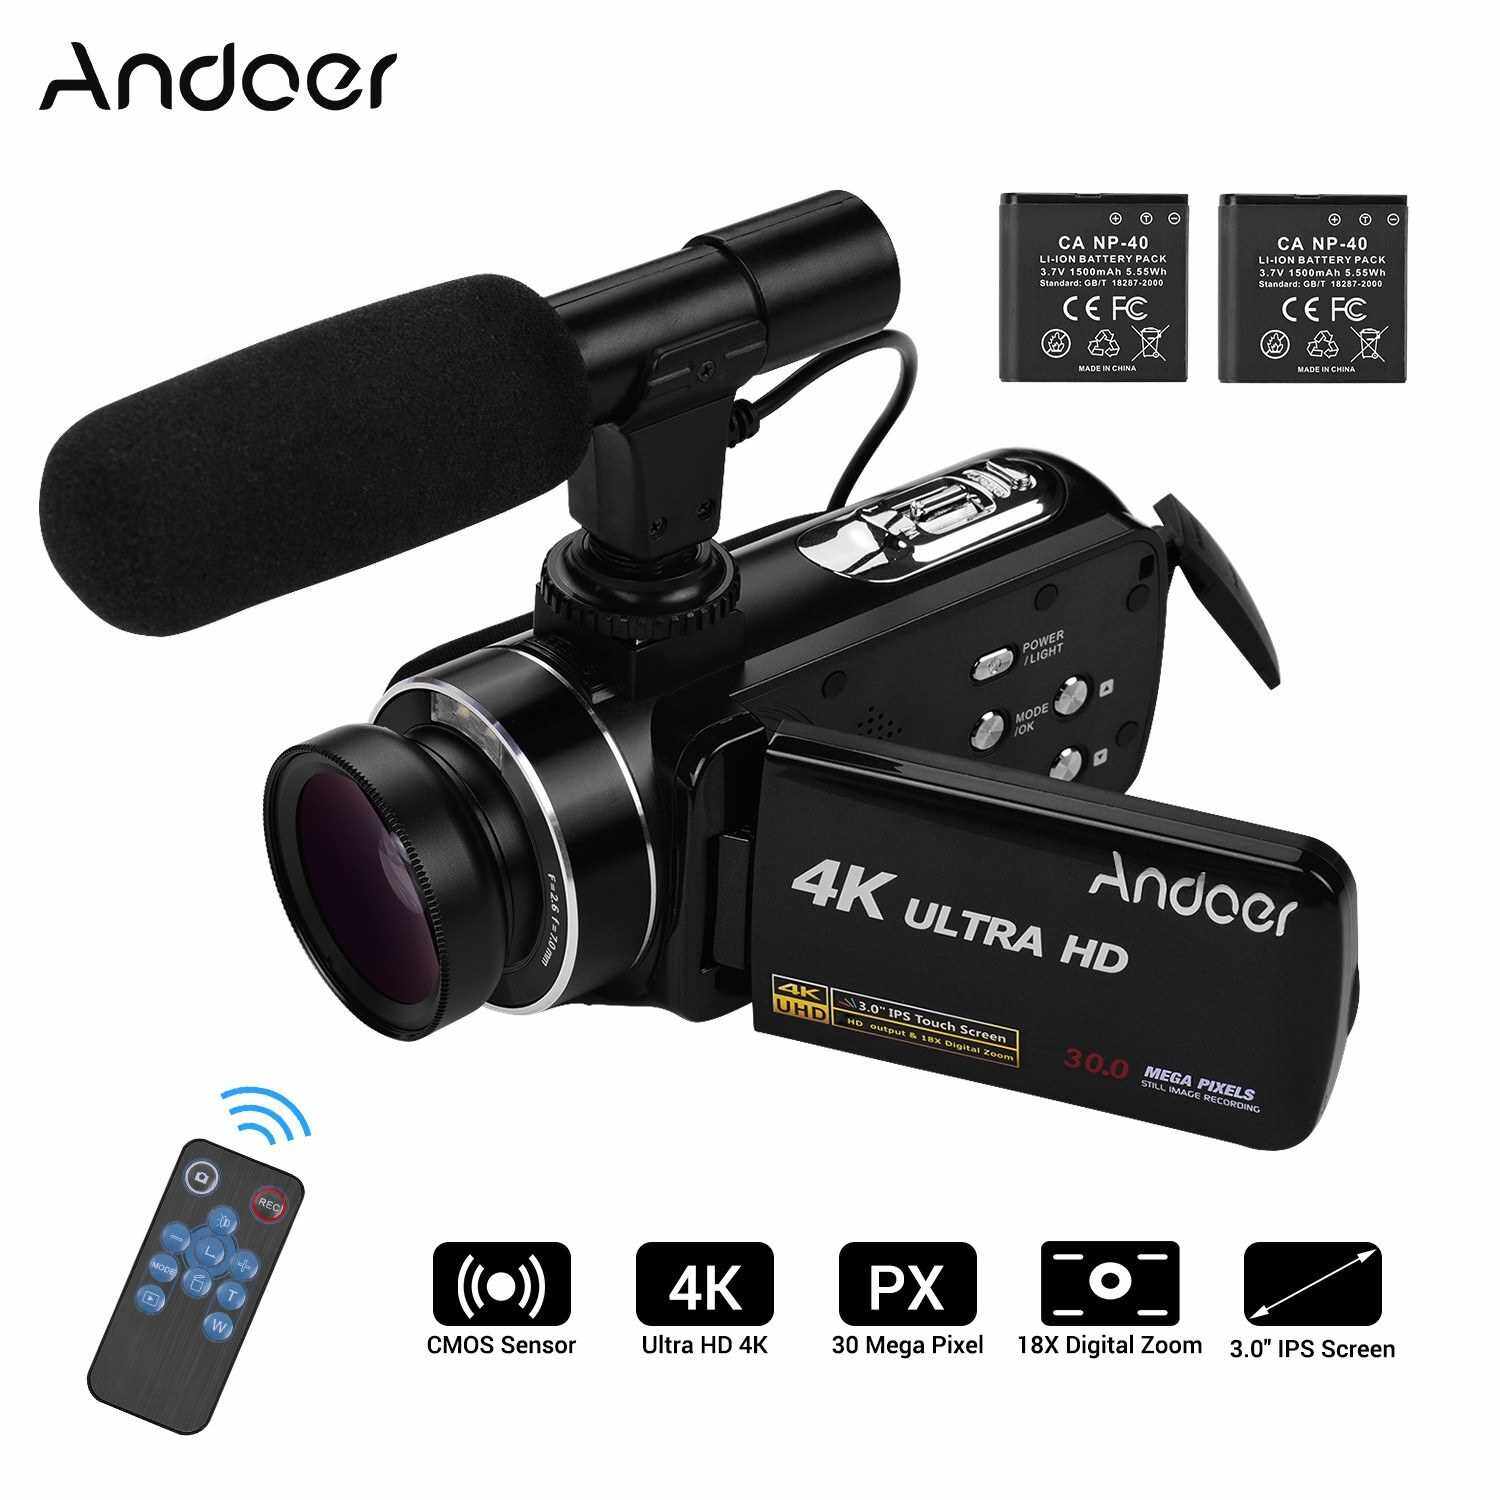 Andoer 4K Ultra HD Handheld DV Professional Digital Video Camera CMOS Sensor Camcorder with 0.45X Wide Angle Lens with Macro Stereo On-Camera Microphone Hot Shoe Mount 3.0 Inch IPS Monitor Burst Shooting Anti-Shaking Function (Standard)